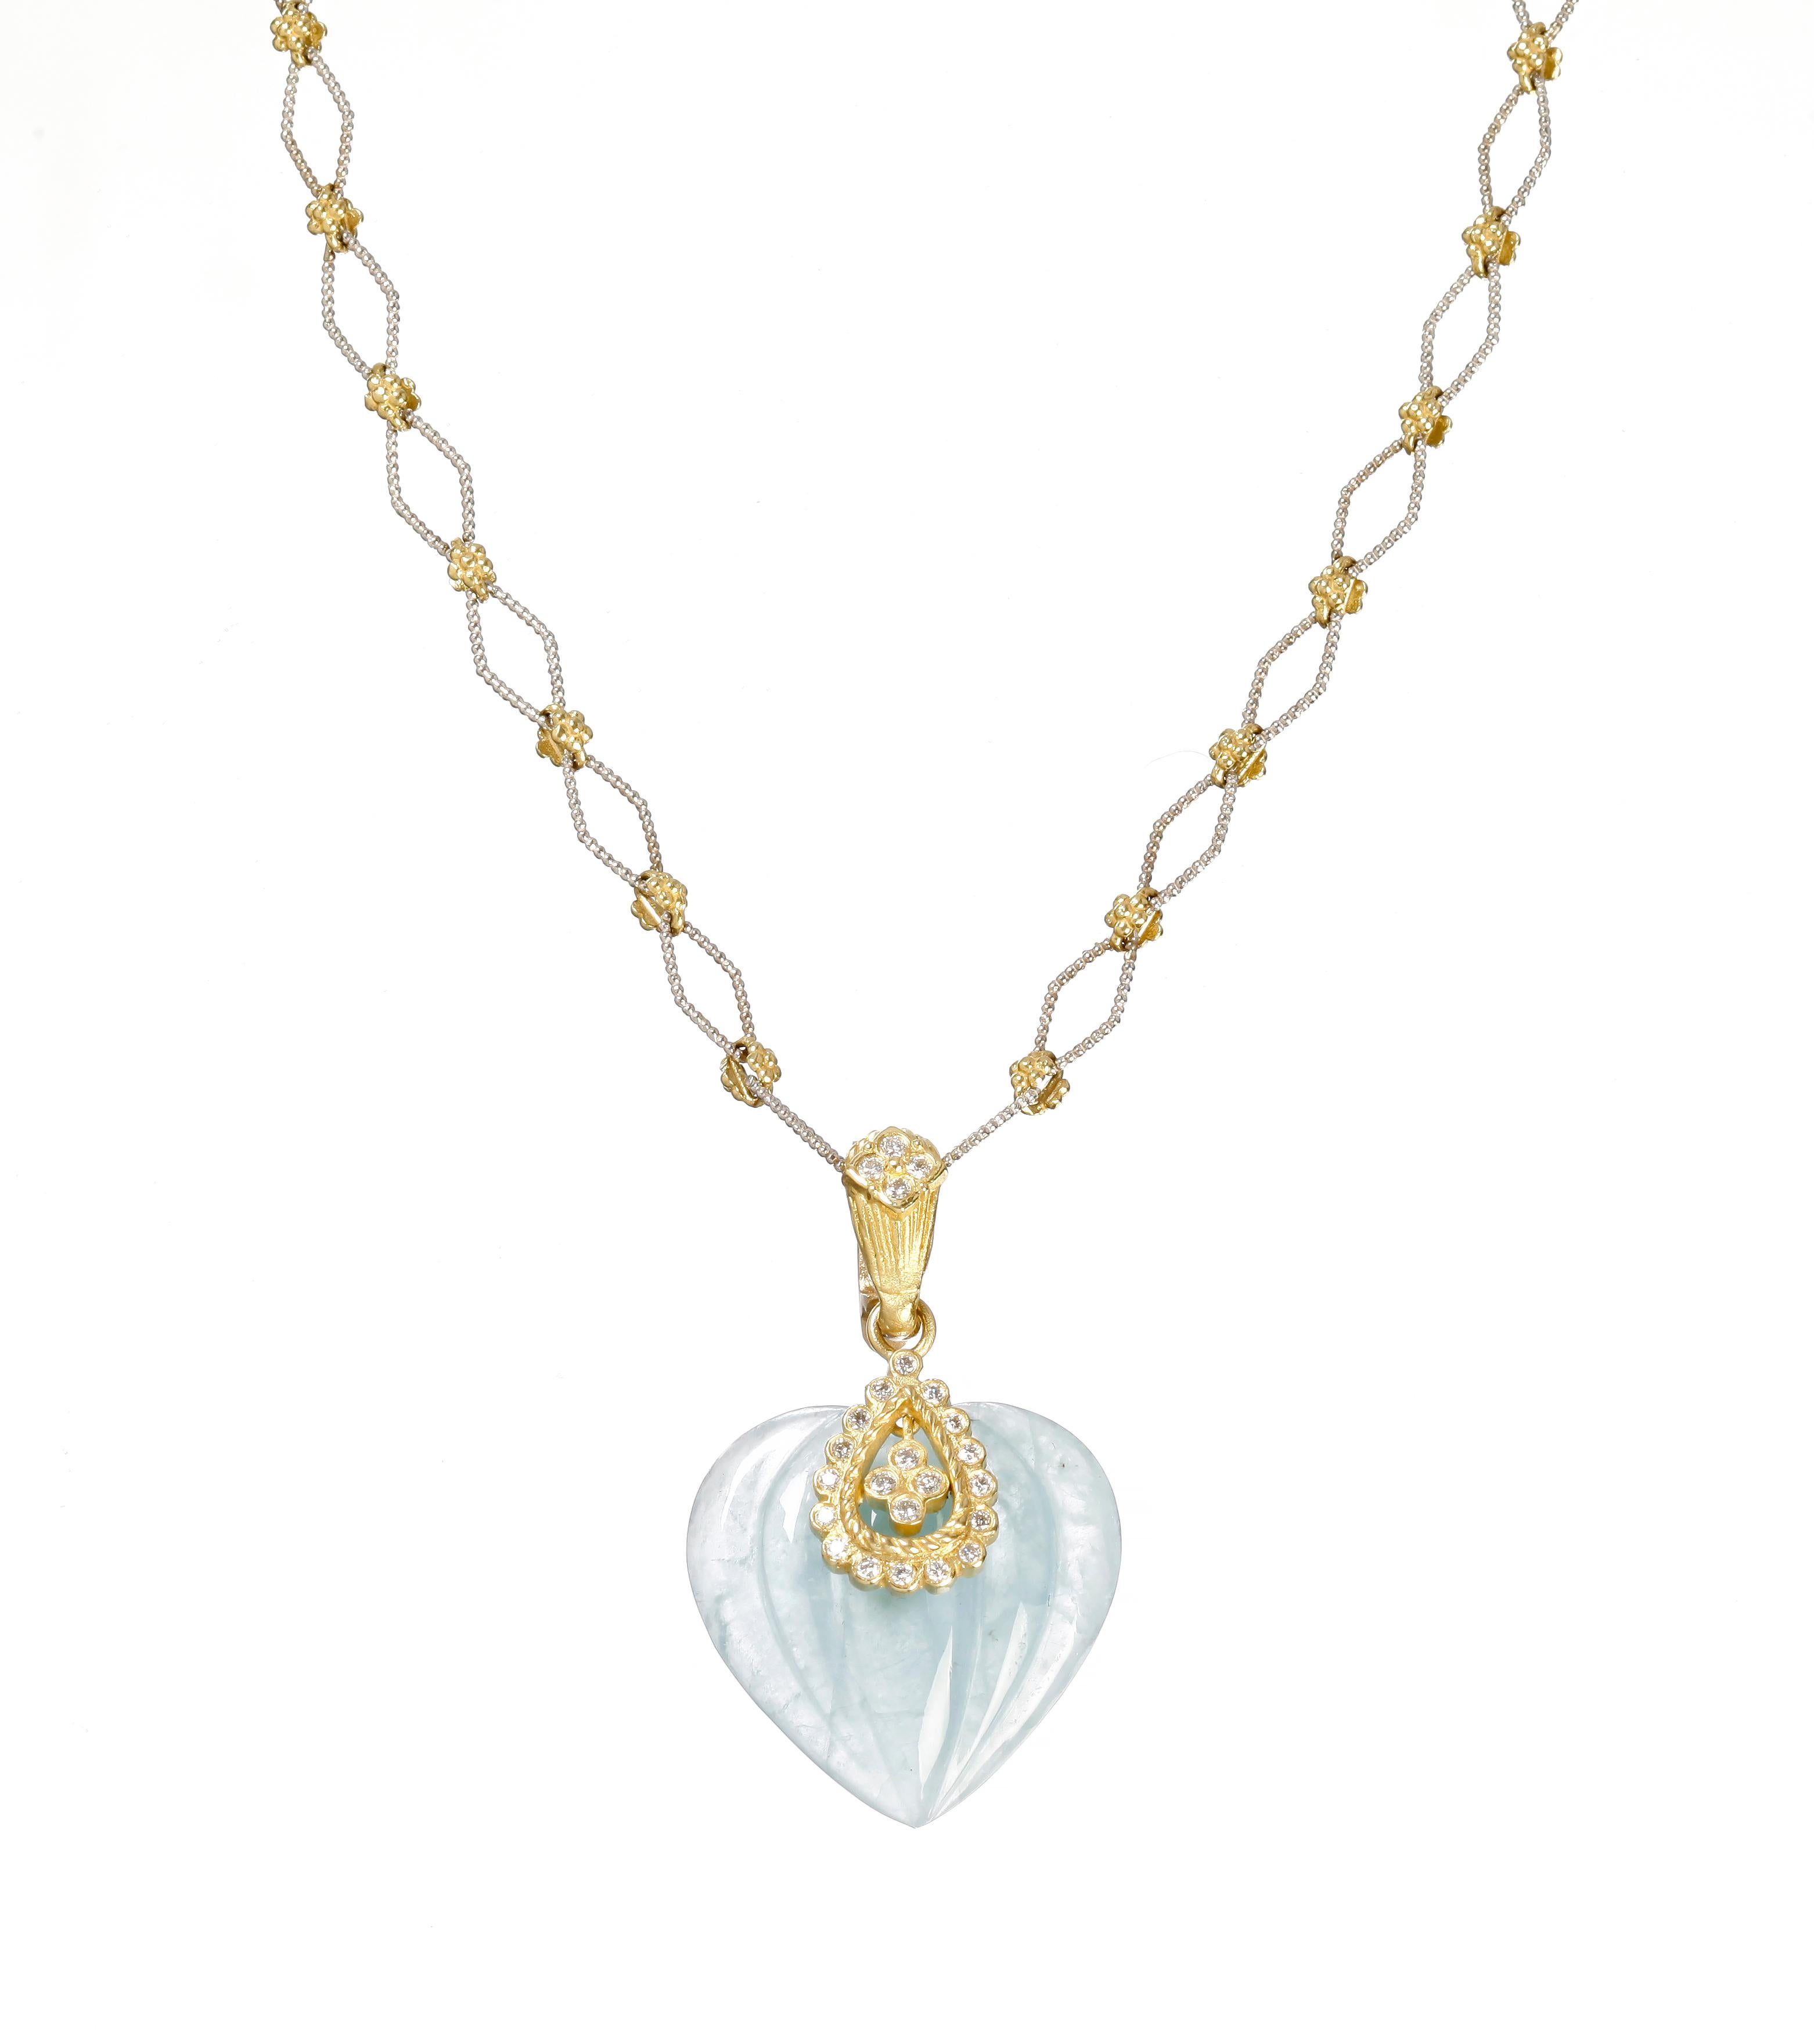 IF YOU ARE REALLY INTERESTED, CONTACT US WITH ANY REASONABLE OFFER. WE WILL TRY OUR BEST TO MAKE YOU HAPPY!

18K Yellow Gold and Diamond Milky Aquamarine Heart Enhancer Pendant with Two-Tone Gold Chain

Special-cut, Milky Aquamarine pendant has